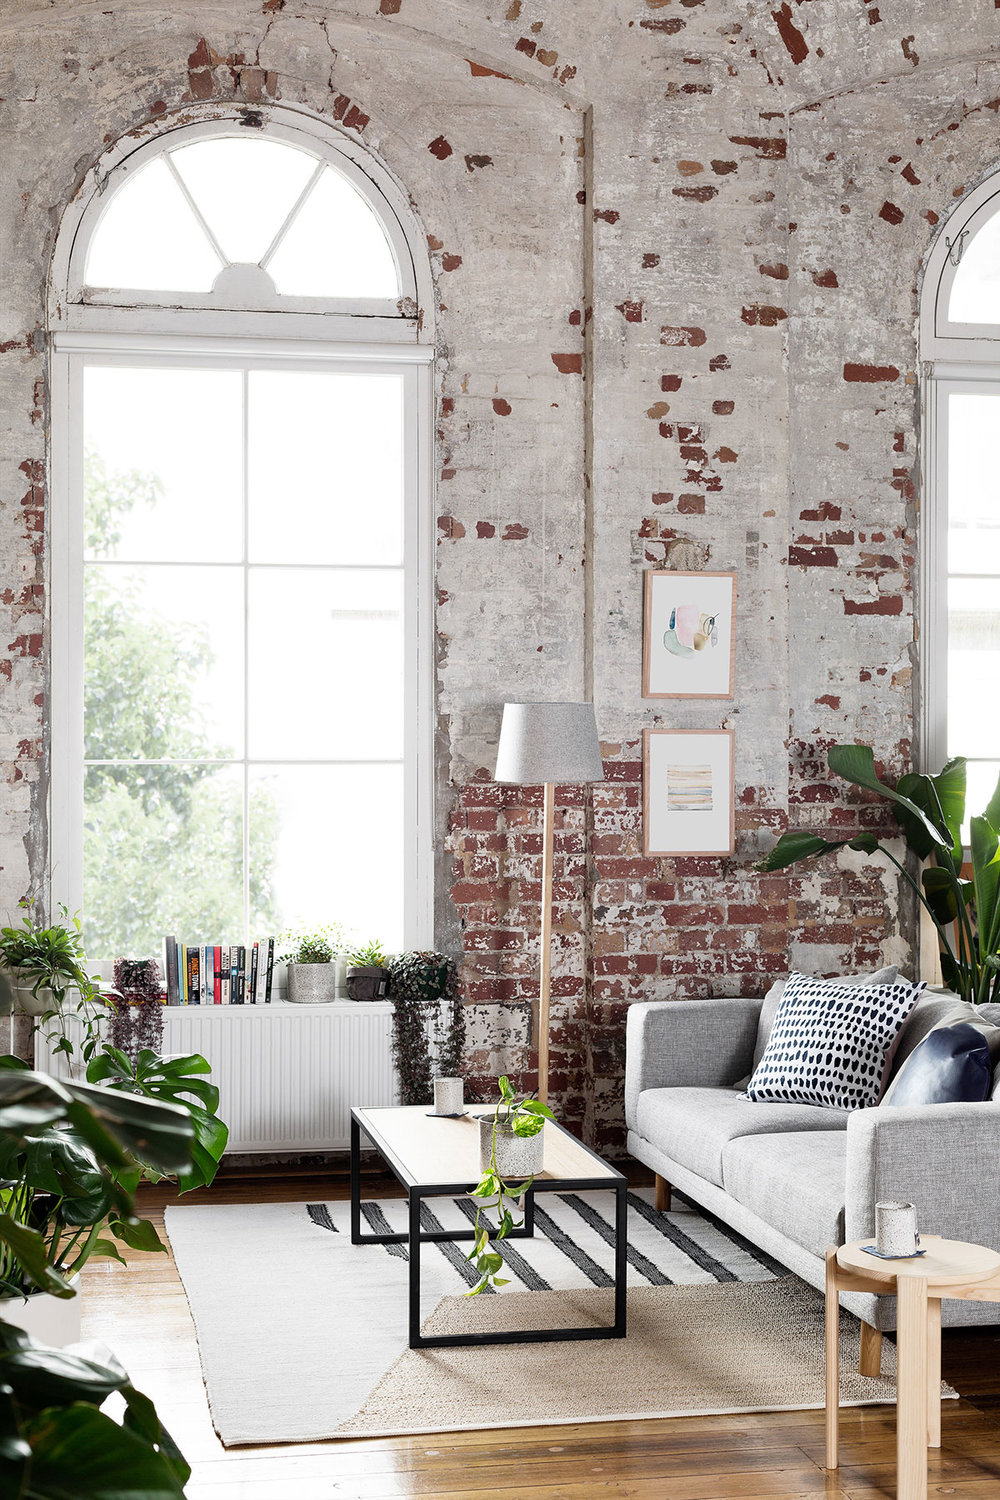 Hunting for George transform converted warehouse apartment for the launch of their newest collection 'Welcome Home'...